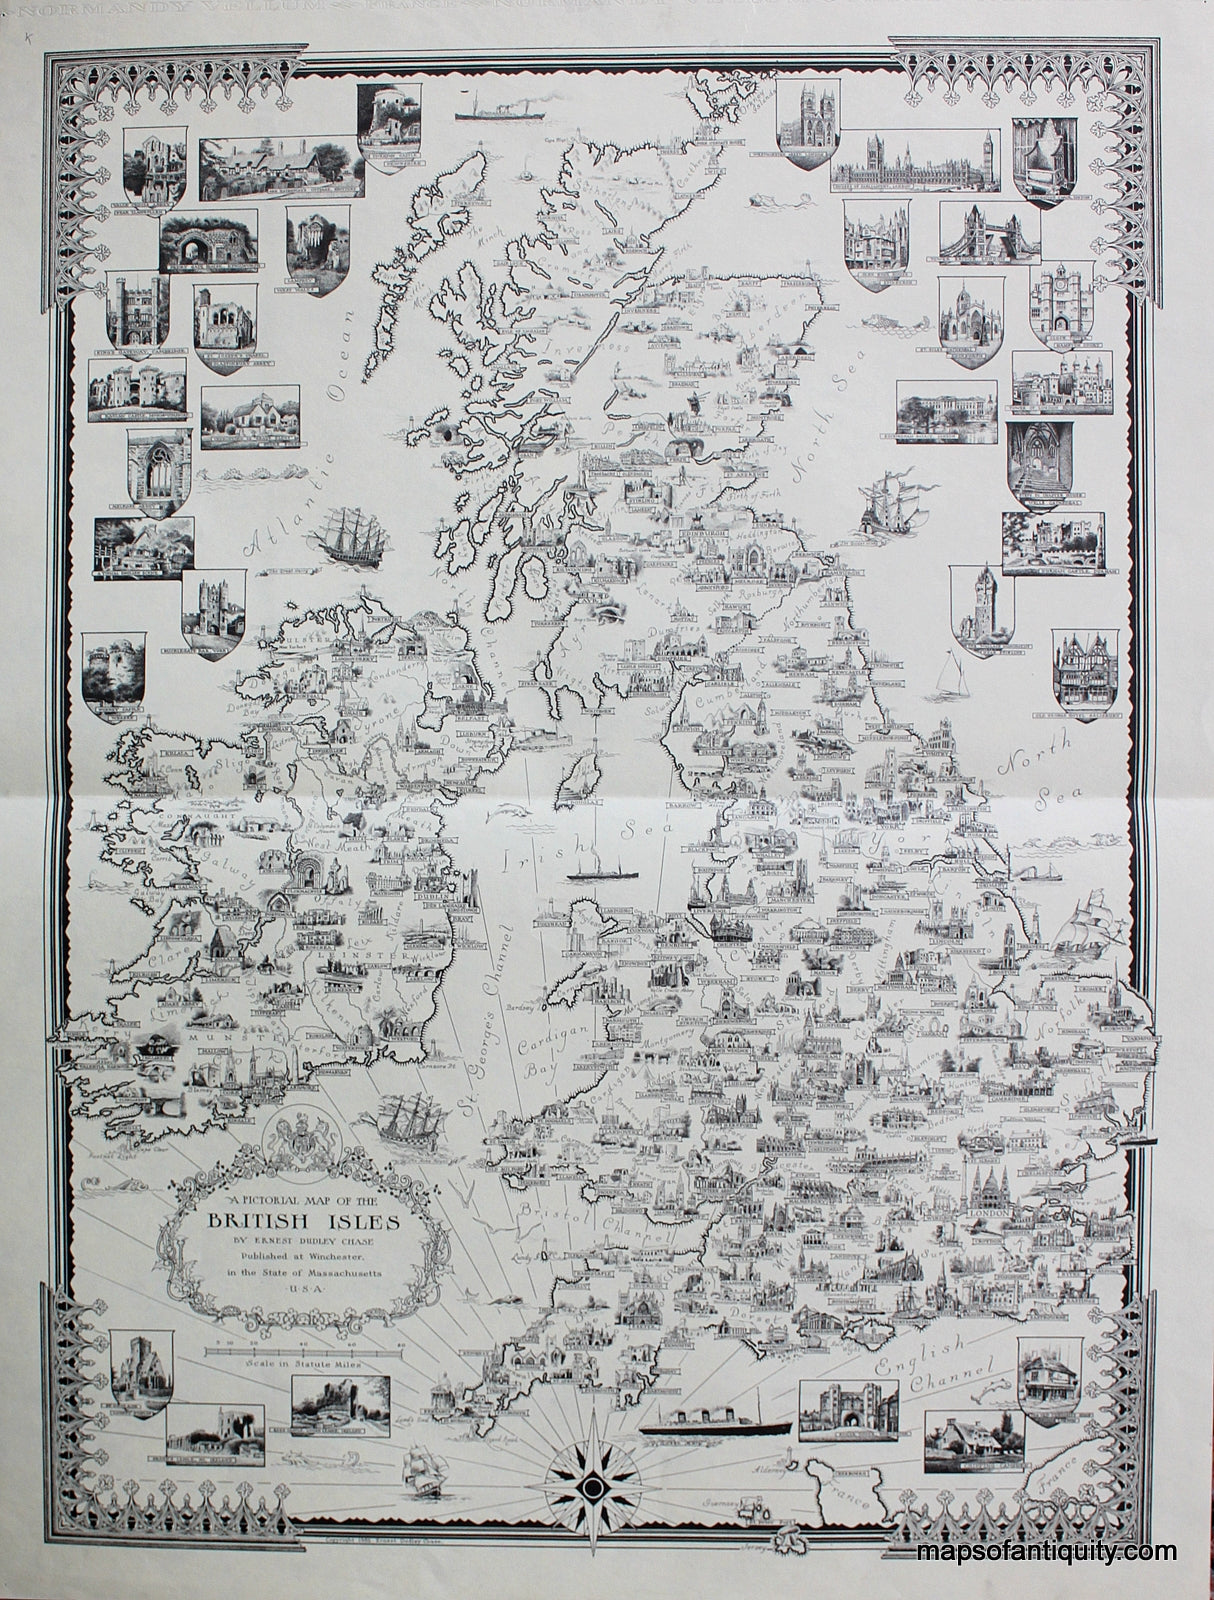 Antique-Black-and-White-Pictorial-Map-A-Pictorial-Map-of-the-British-Isles-by-Ernest-Dudley-Chase****-Europe-United-Kingdom-1935-Ernest-Dudley-Chase-Maps-Of-Antiquity